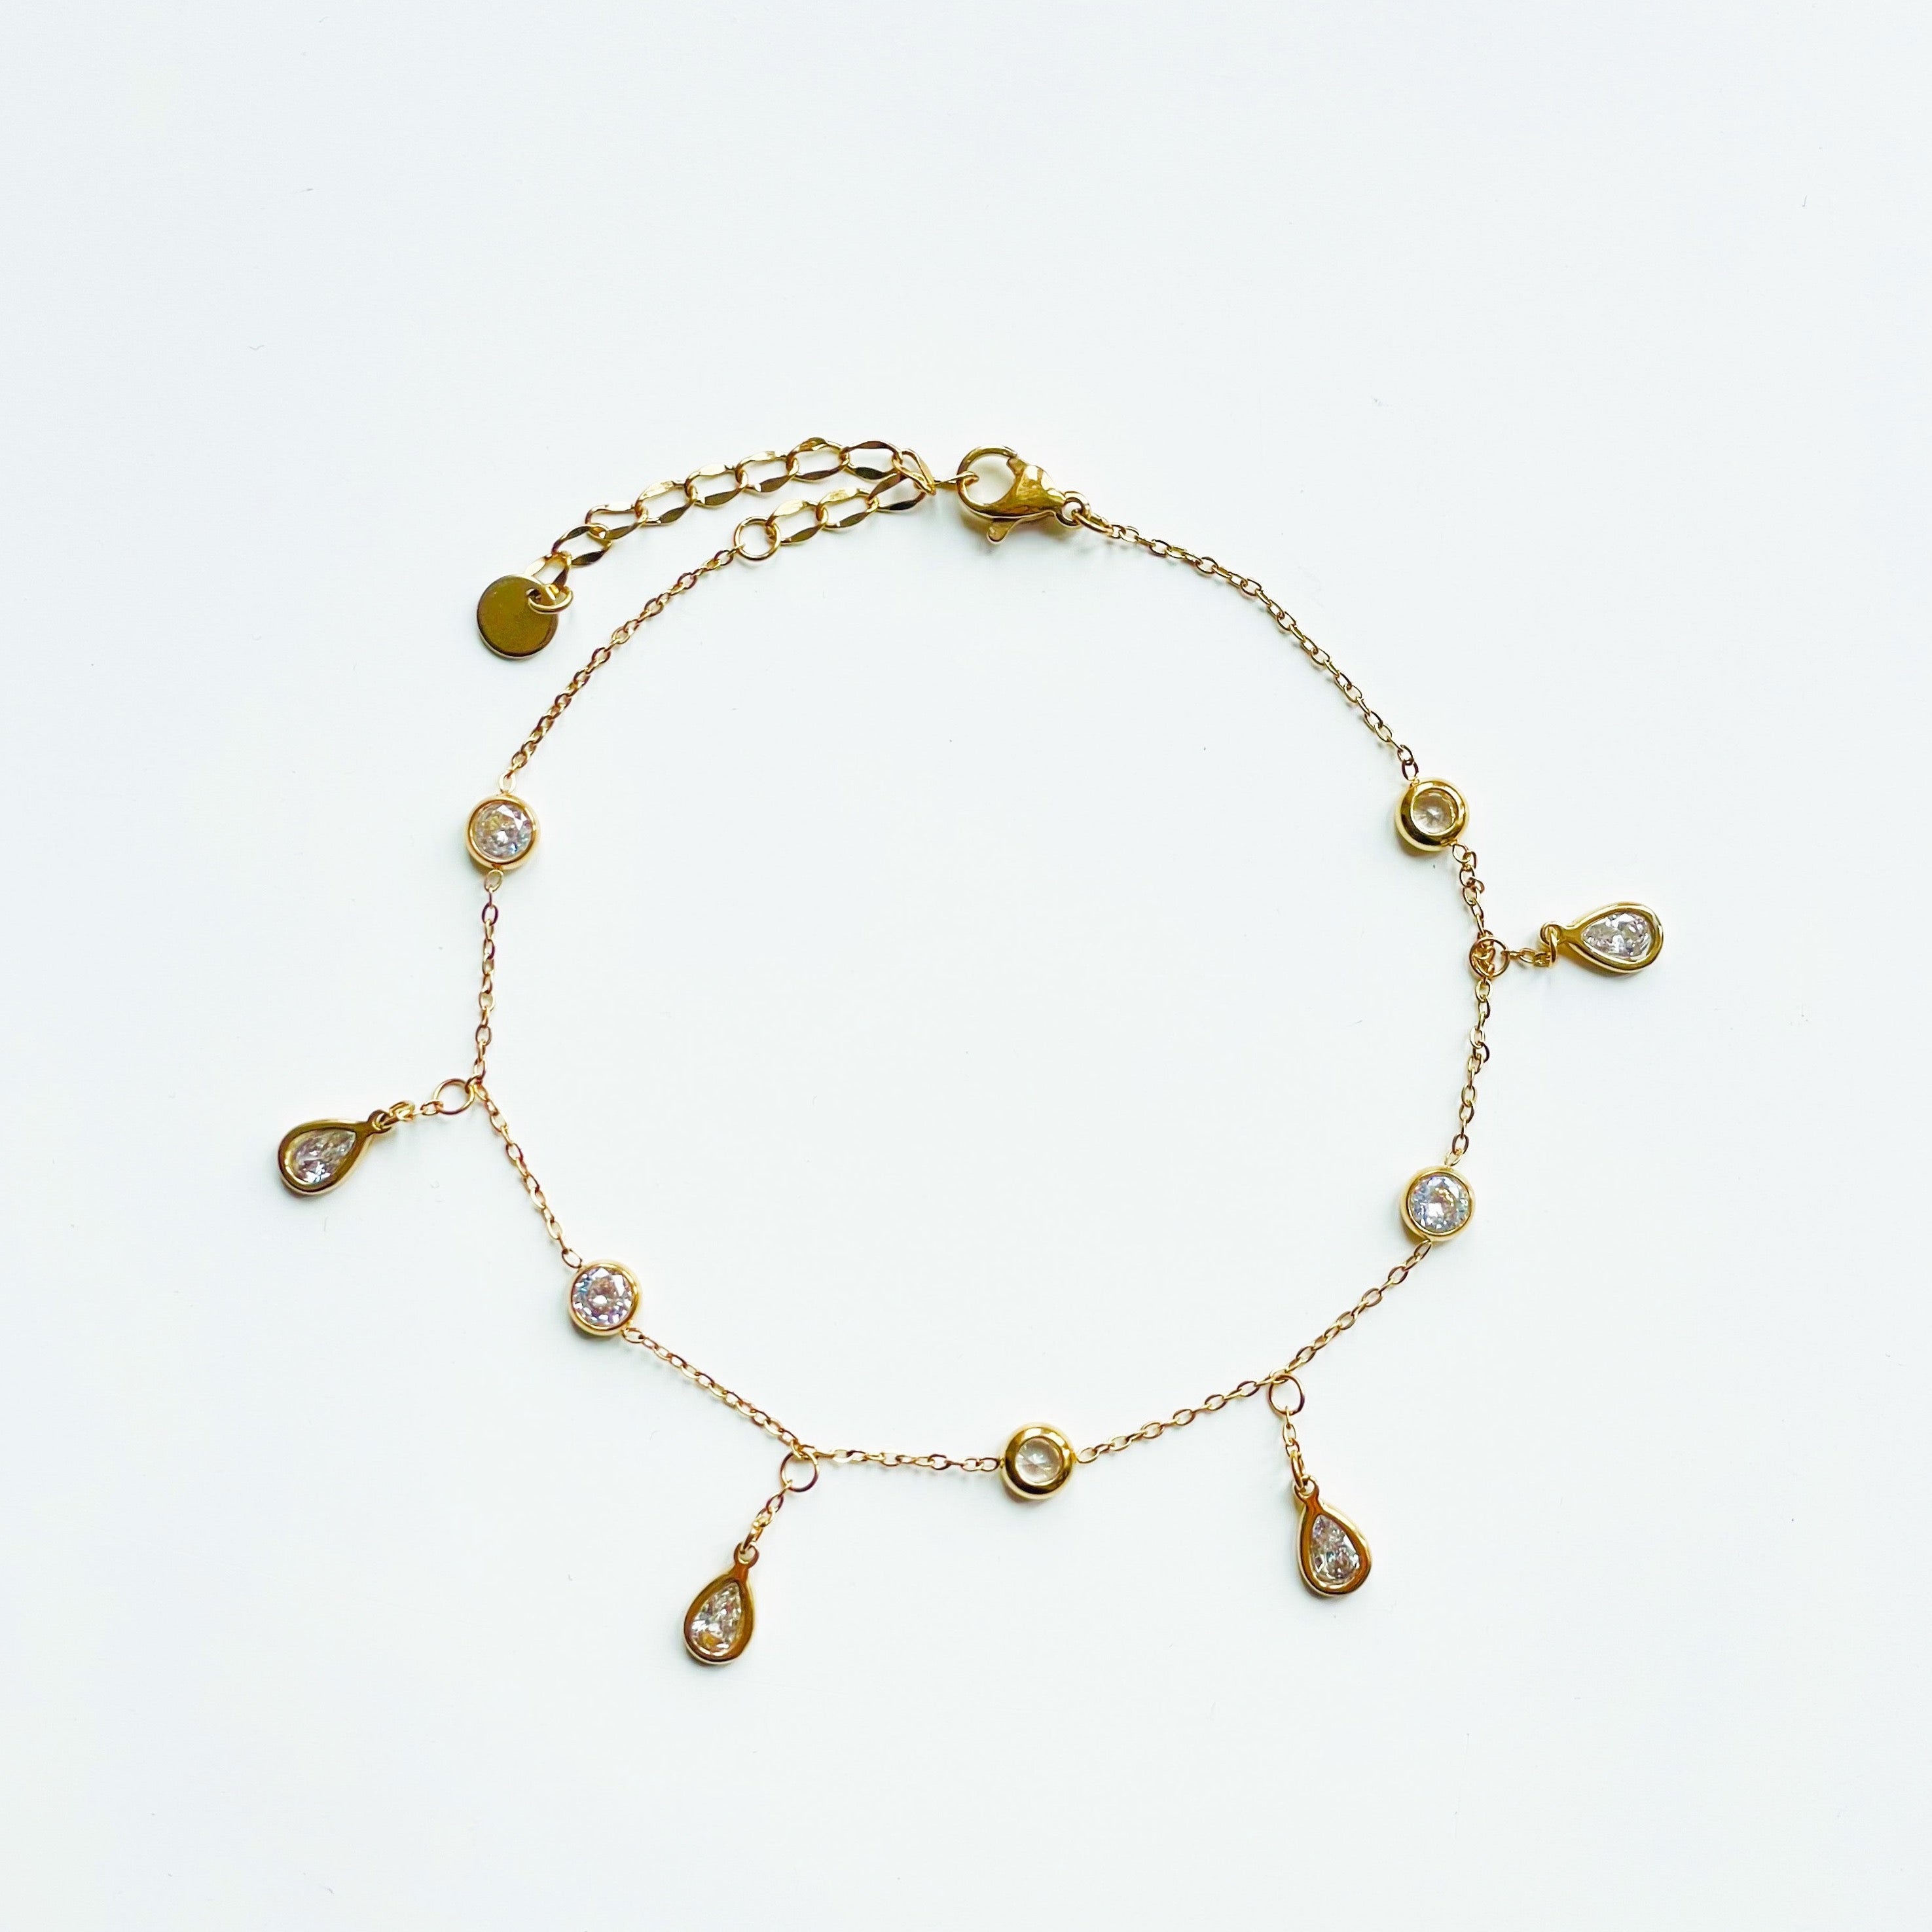 Sholah Luxe 18k Gold Plated Anklet